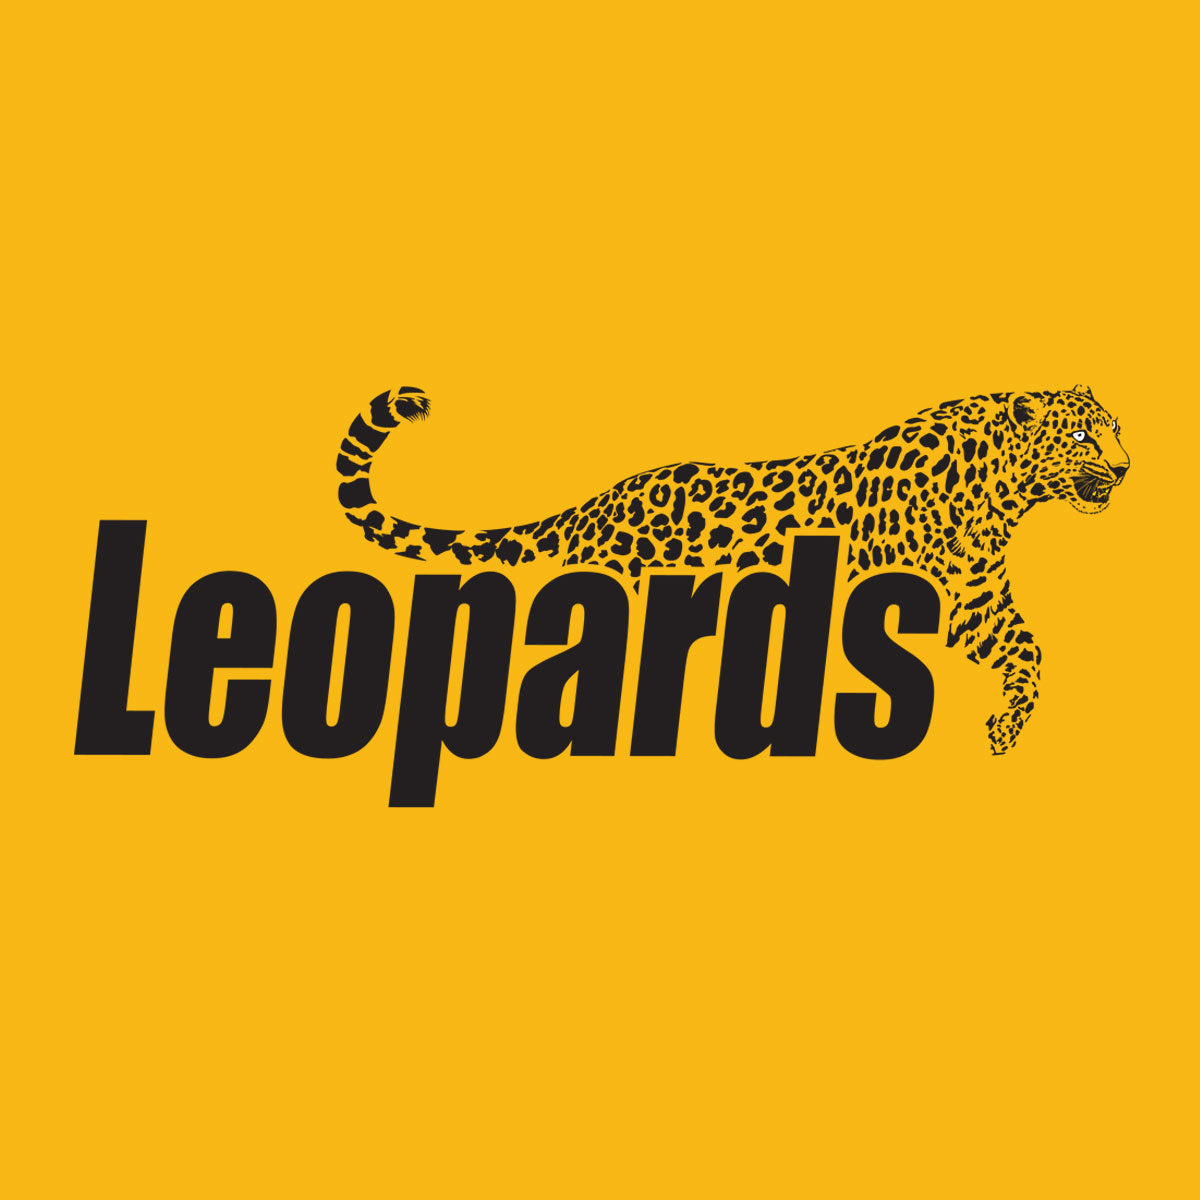 Hire Shopify Experts to integrate Leopards Courier Integration app into a Shopify store